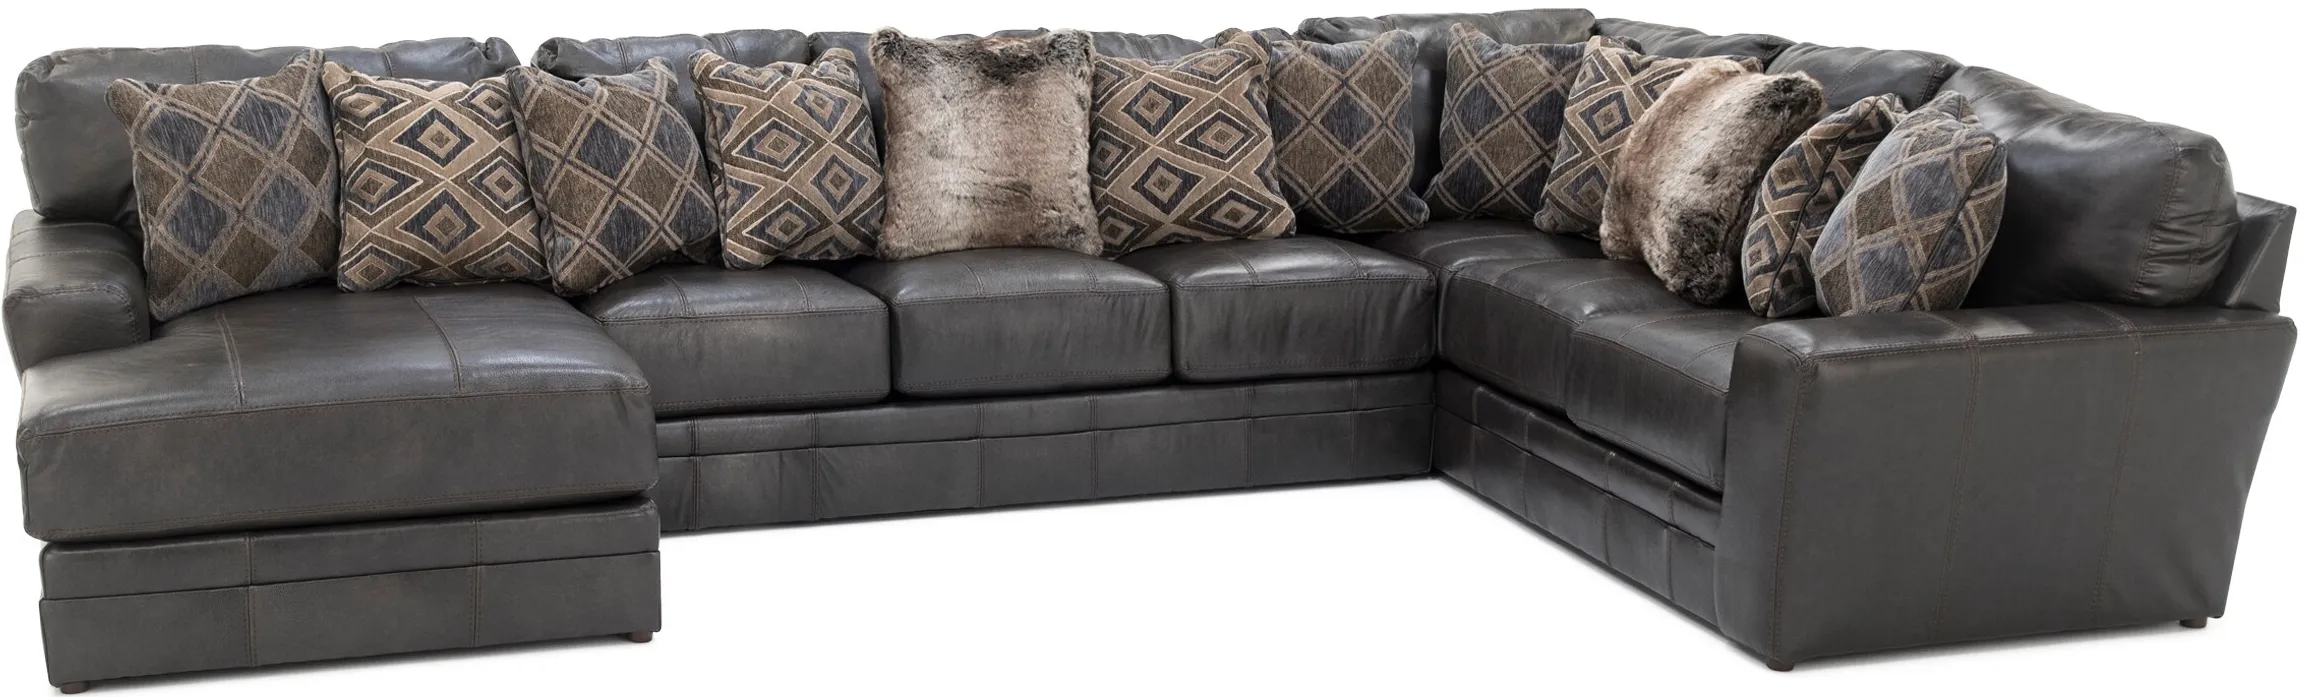 Camden Large 3-Pc. Leather Sectional with Left Arm Facing Chaise in Steel